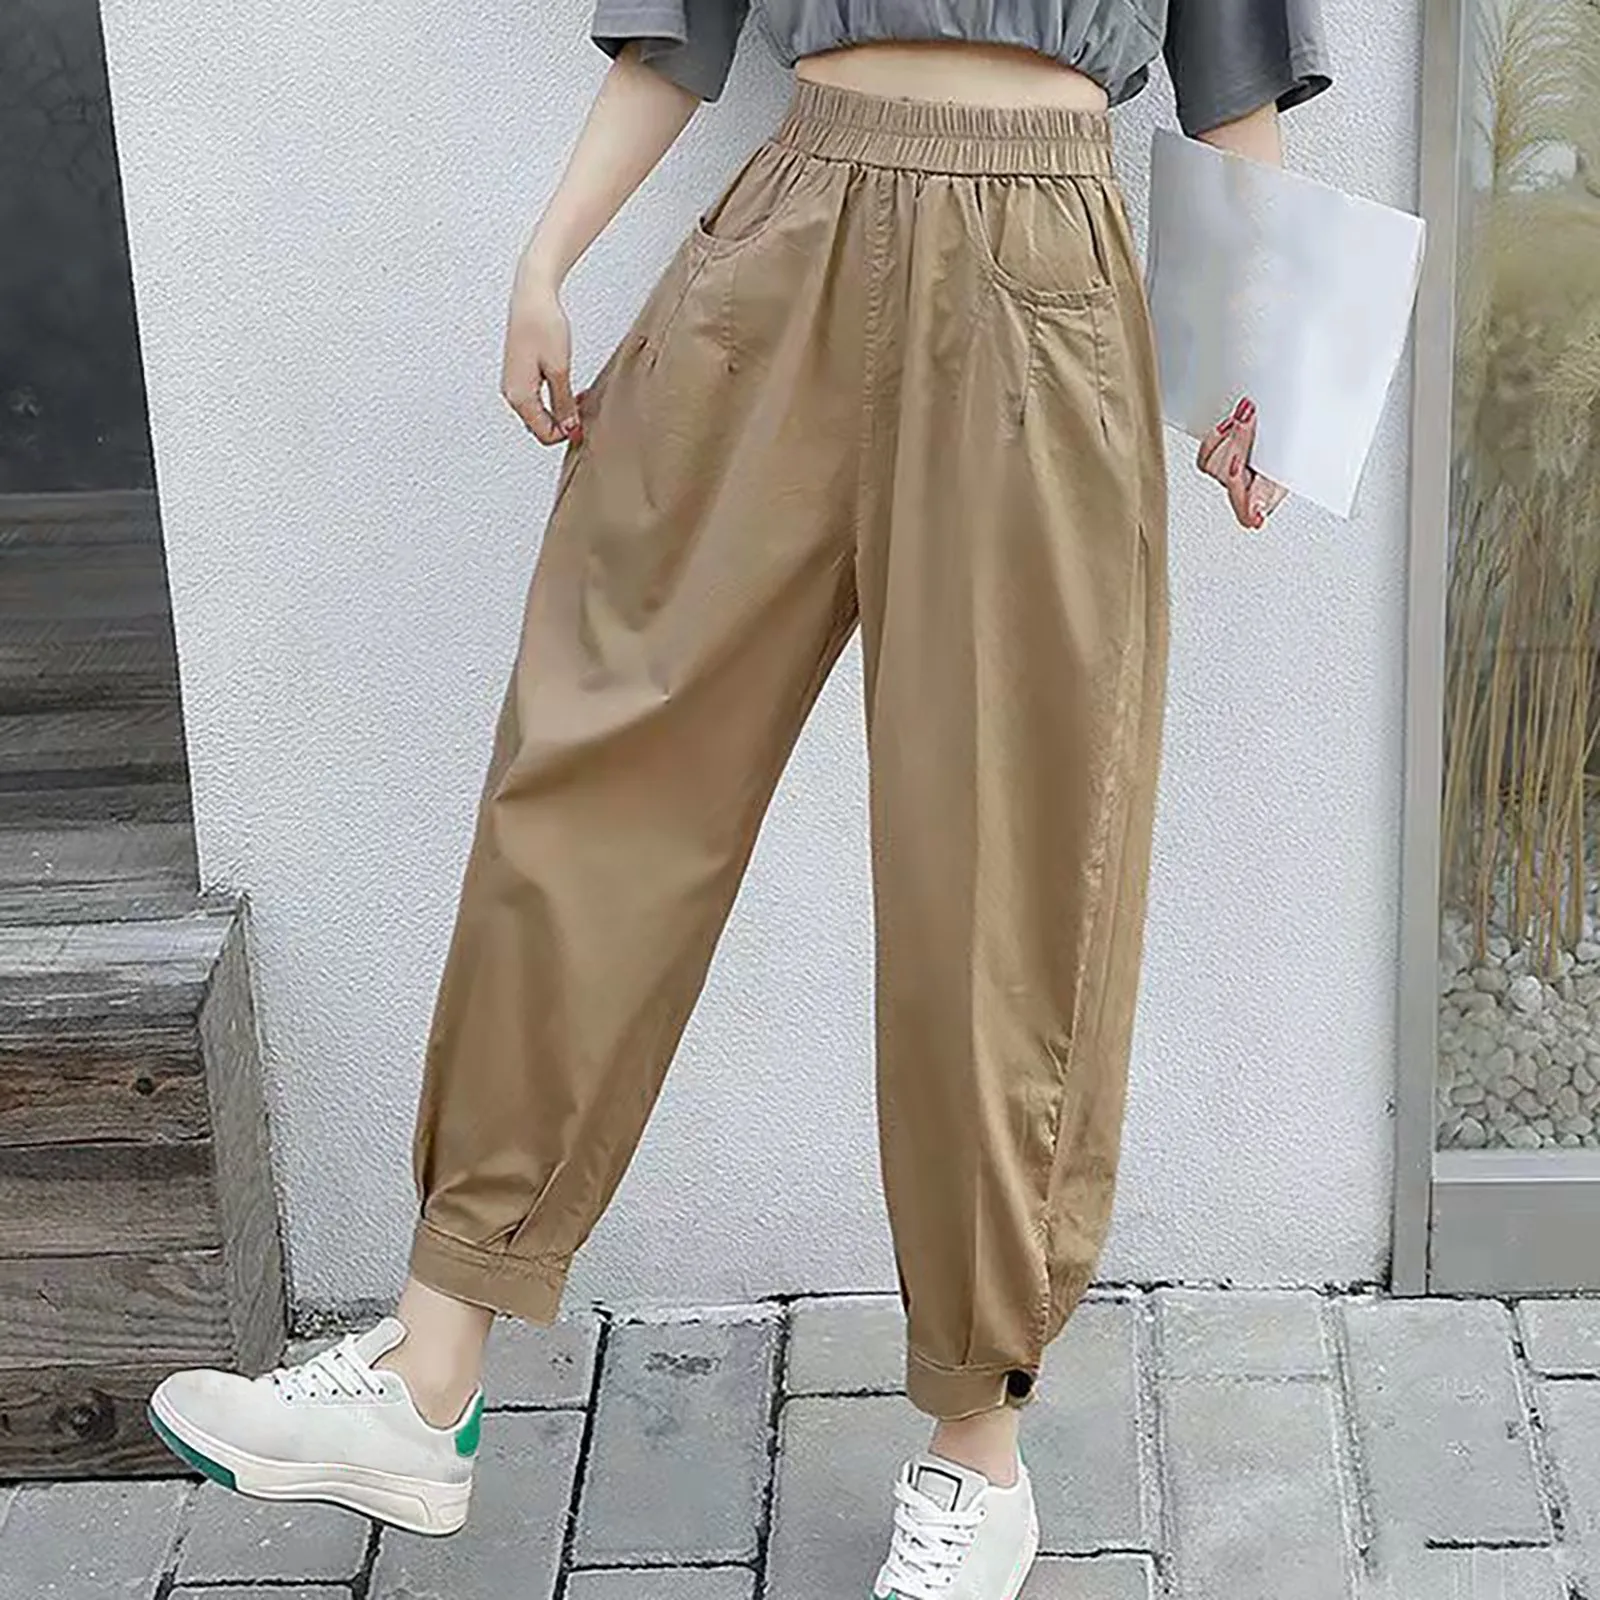 Ankle Length Causal Pants Streetwear Women Khaki Stylish Pockets Spring Solid Unisex Solid Aesthetic Harem Trouser Chic Soft Hot